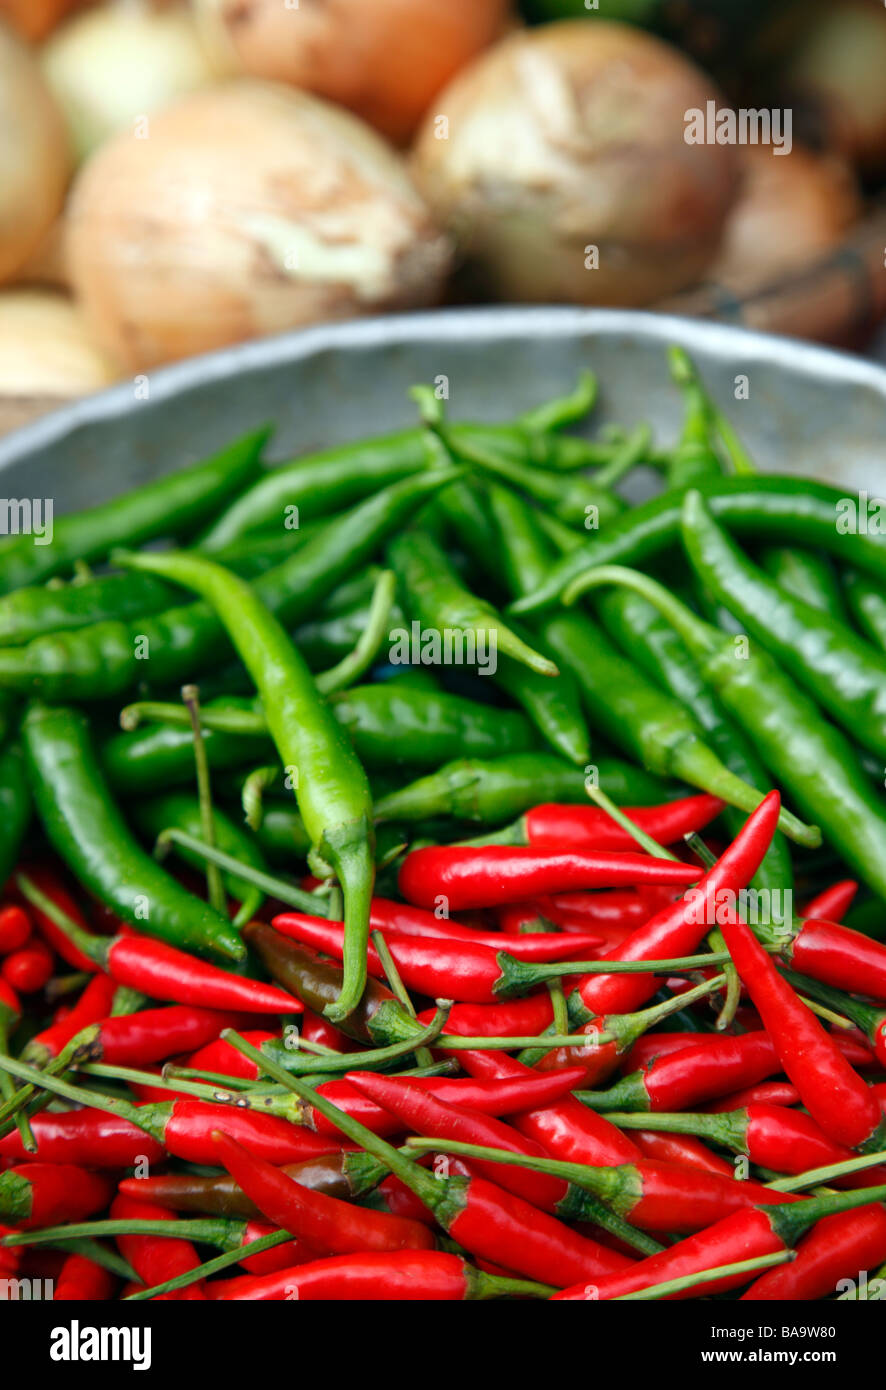 Green and red chilies Stock Photo